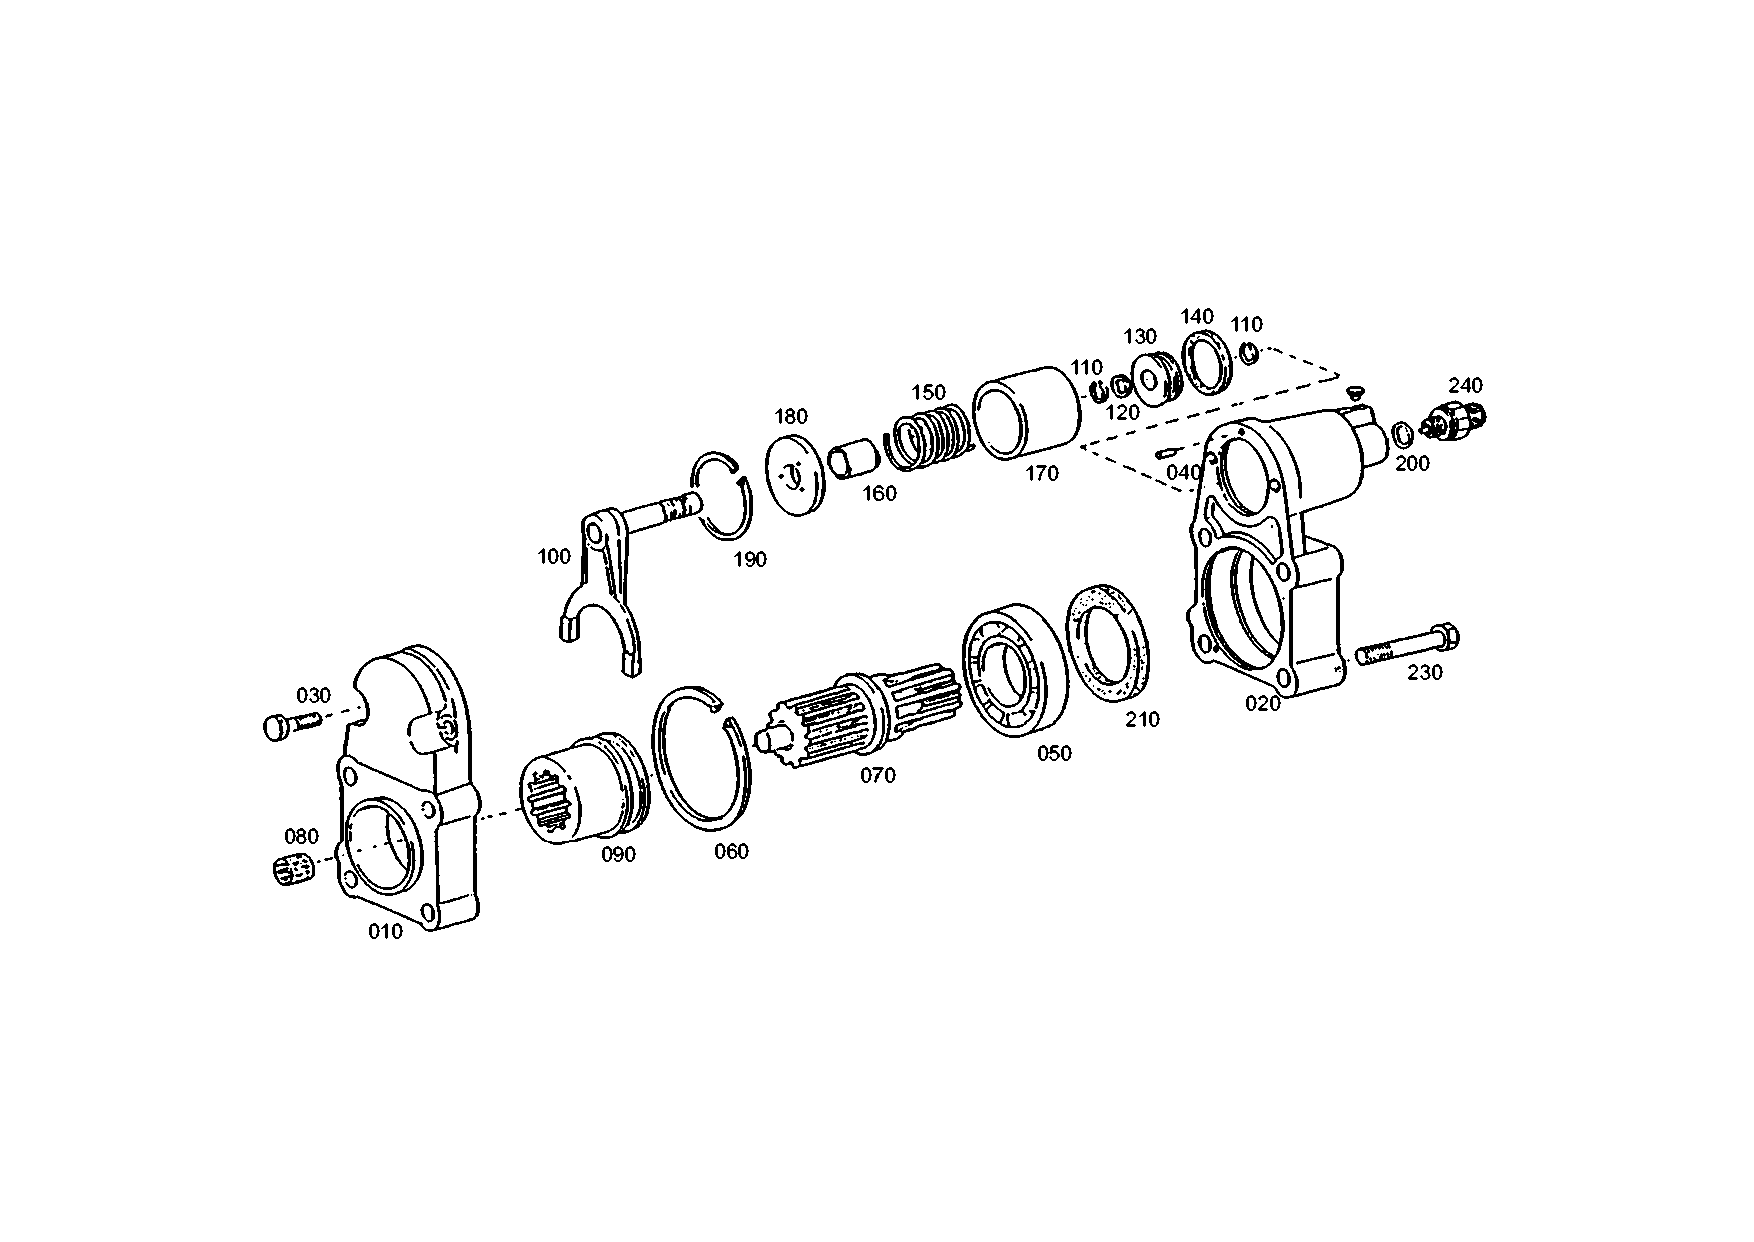 drawing for DONGFENG MOTOR CO. 5000803548 - SHAFT SEAL (figure 3)